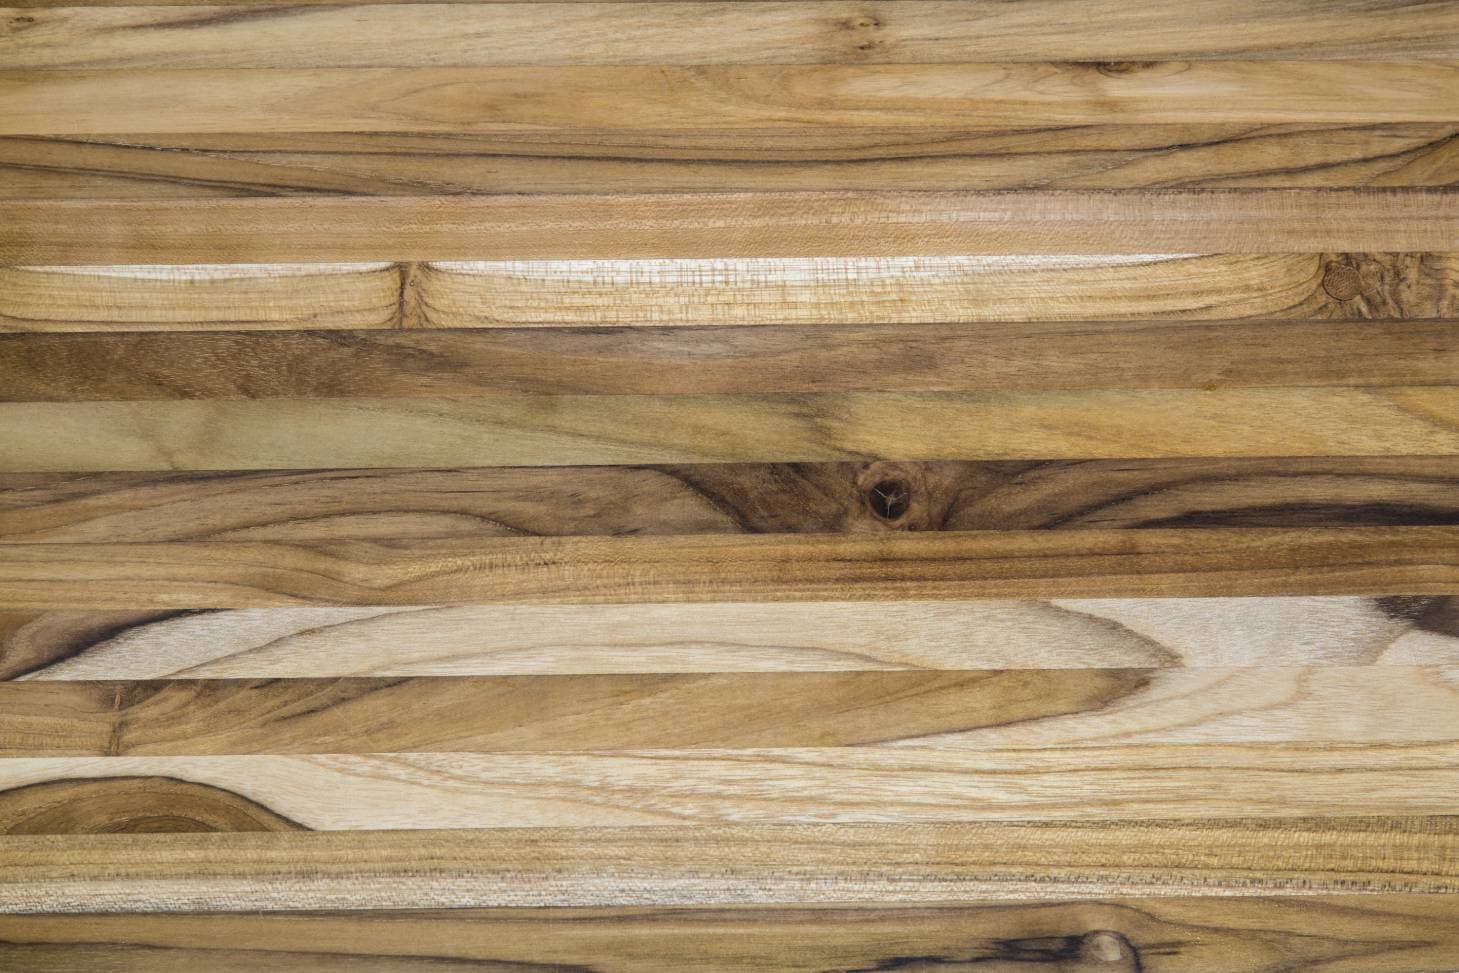 27 Different Common Types of Wood Grain Patterns (With Pictures)